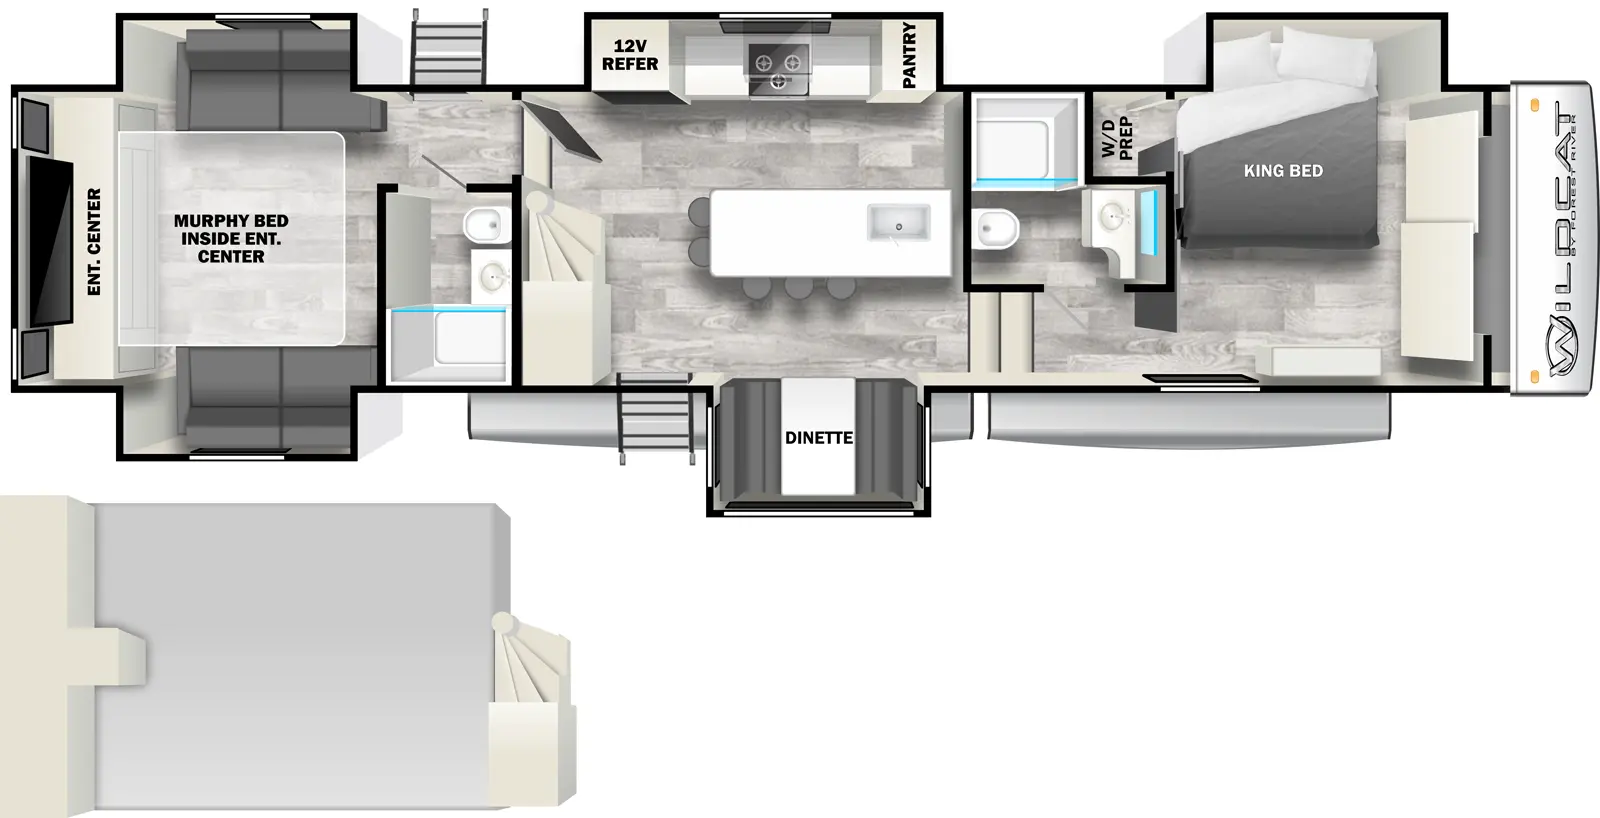 The 38BET has five slideouts and two entries. Interior layout front to back: off-door side king bed slideout, and closet with washer/dryer prep; off-door side full bathroom; steps down to main living area; mid kitchen counter with sink, and 4 barstools; off-door side slideout with pantry, cooktop, and 12V refrigerator; door side slideout with dinette, and entry; stairs to loft area; steps up to rear with door side full bathroom, off-door side second entry; opposing slideouts with seating, and rear entertainment center with murphy bed inside.